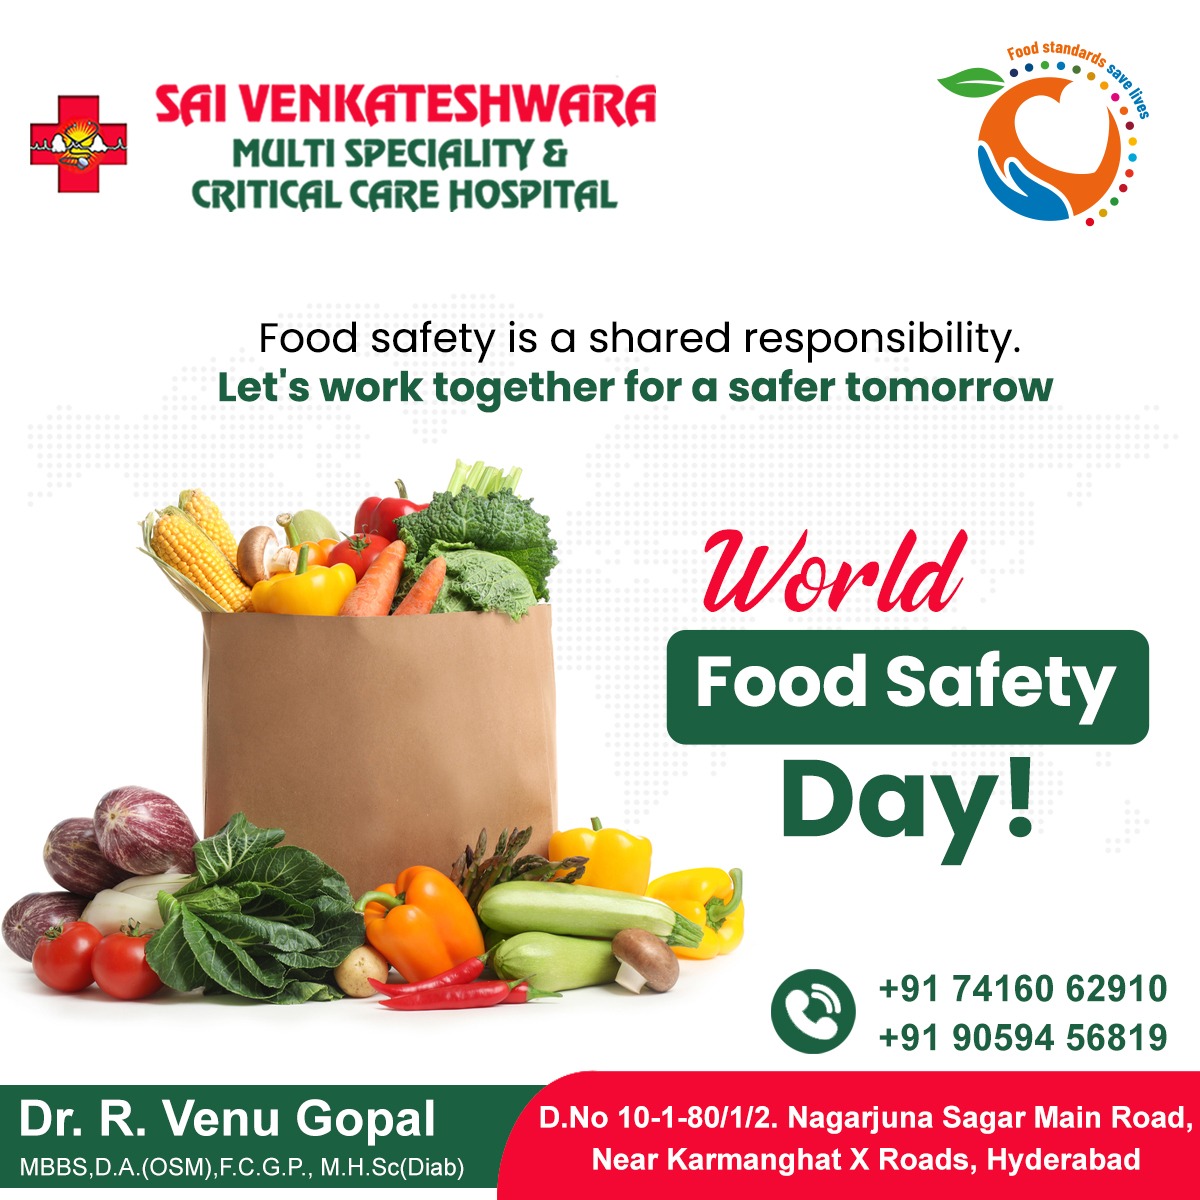 On World Food Safety Day, embrace good food and good health
.
#worldfoodday #WorldFoodSafetyDay #foodsafetymatters #SafeFoodForAll #foodsafetyfirst #healthyeating #foodsecurity #cleanfood #FoodHygiene #GlobalFoodSafety #SaivenkateswaraHospital #SVH